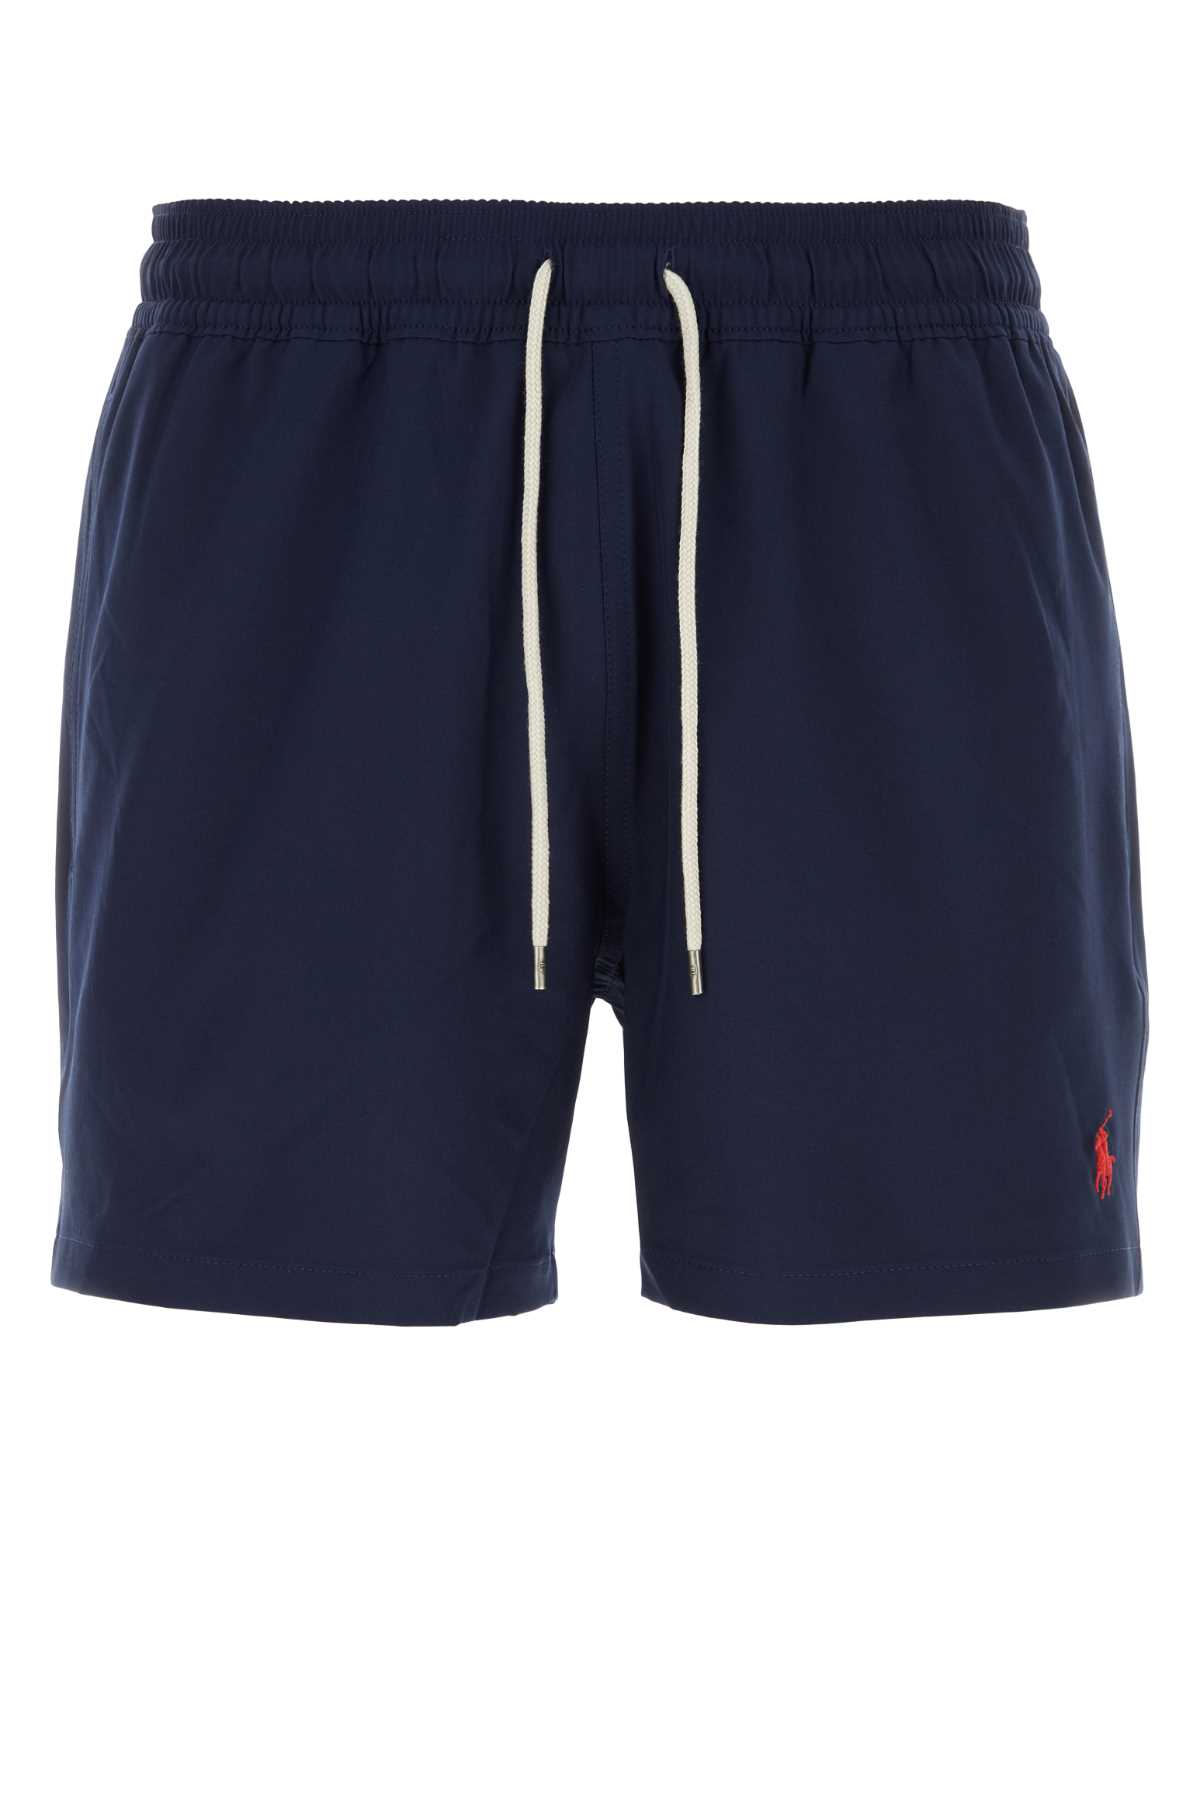 Navy Blue Stretch Polyester Swimming Shorts